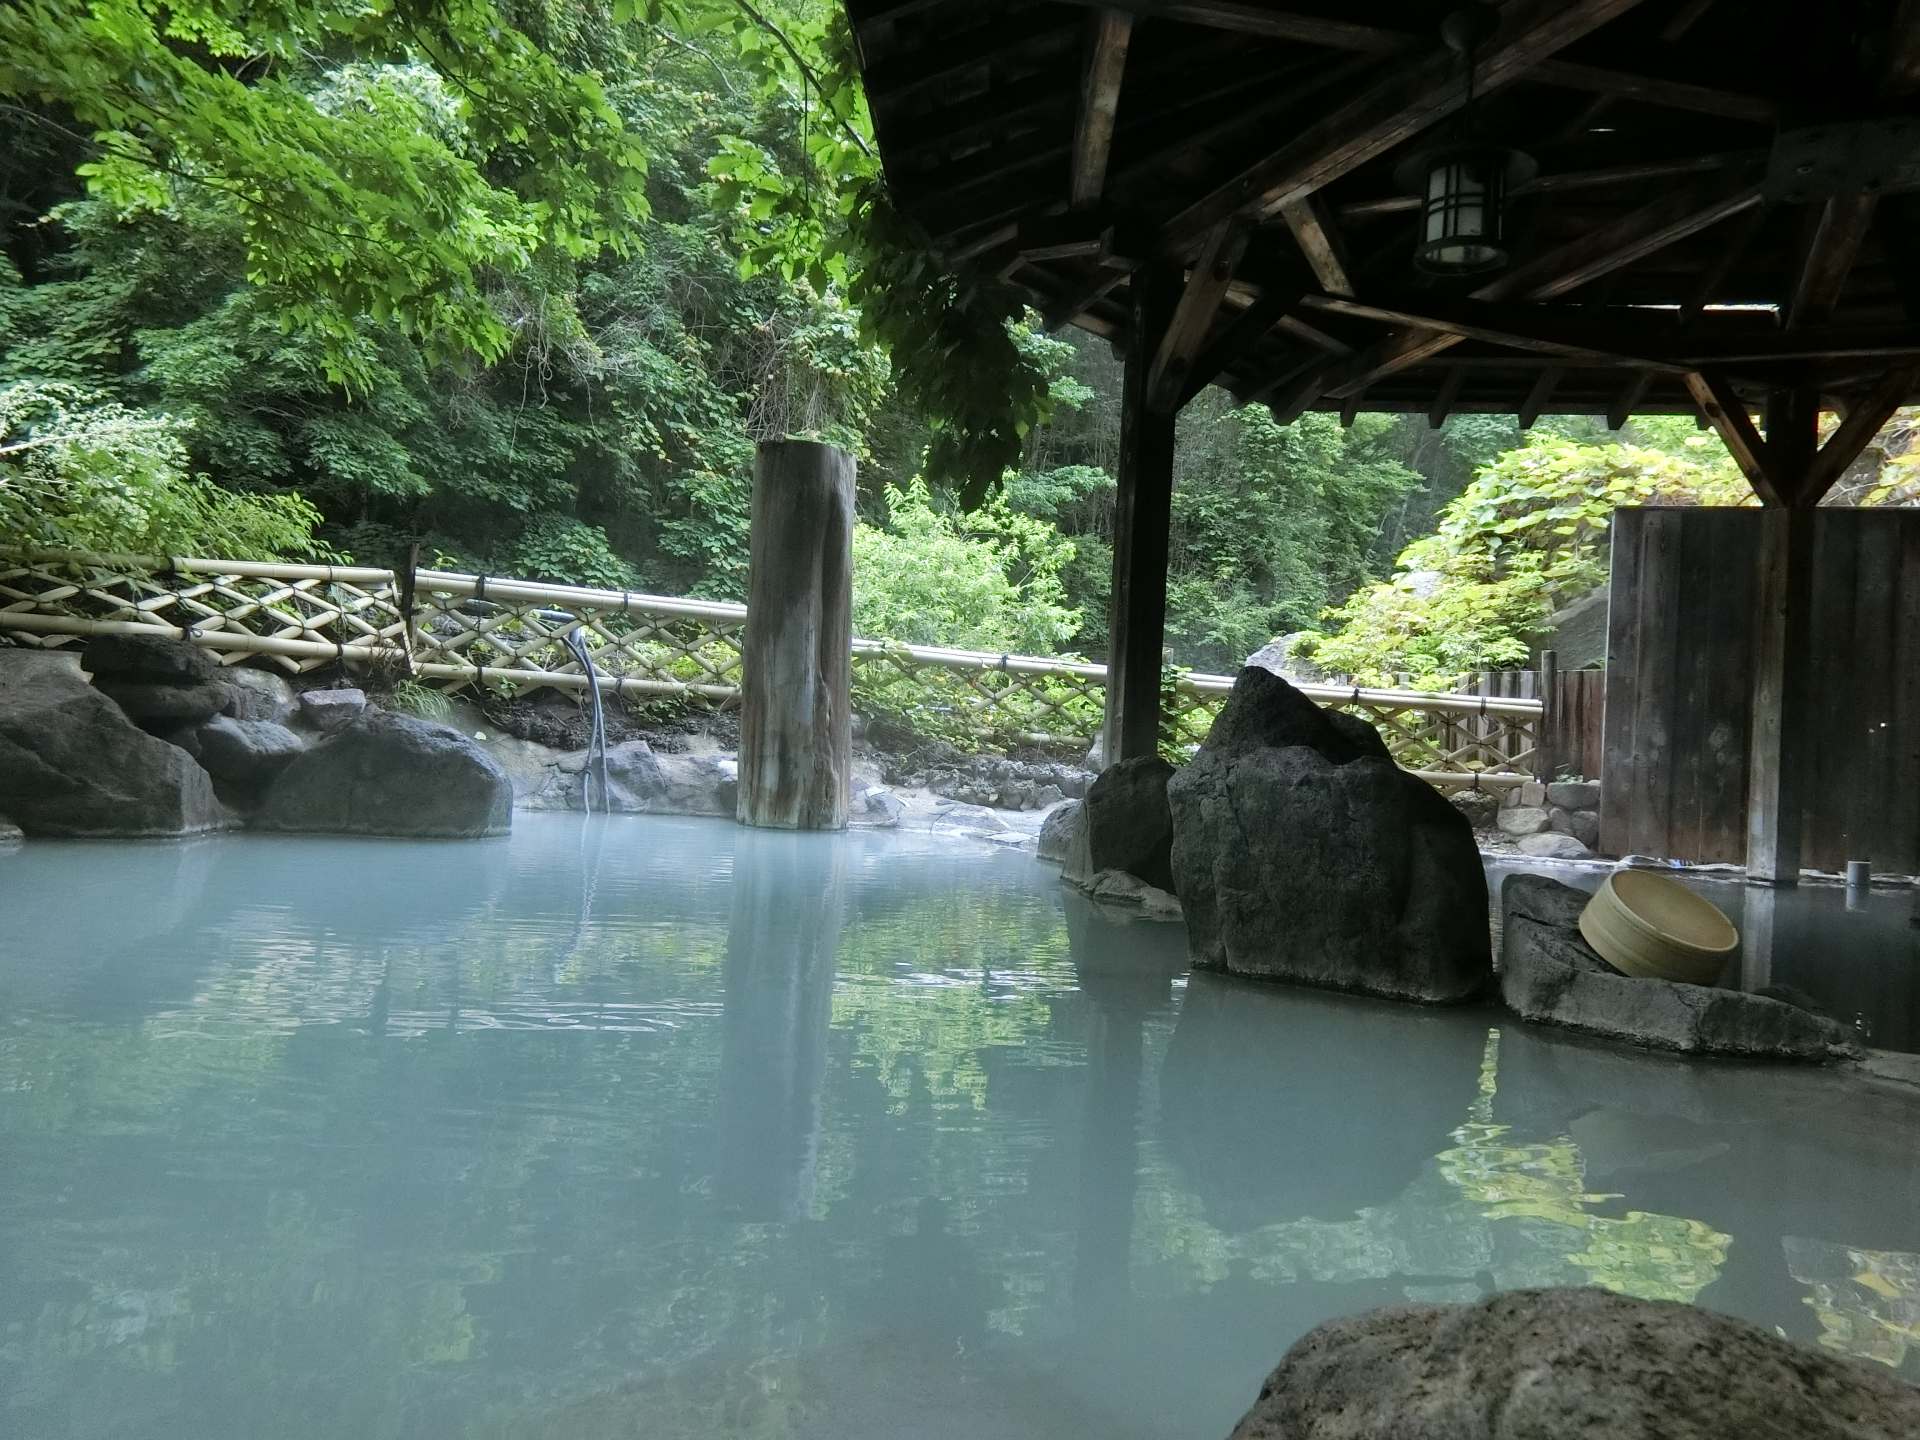 Located in the remote areas of Nikko, Okukinu Onsen is known as "the last hidden hot spring in the Kanto region."